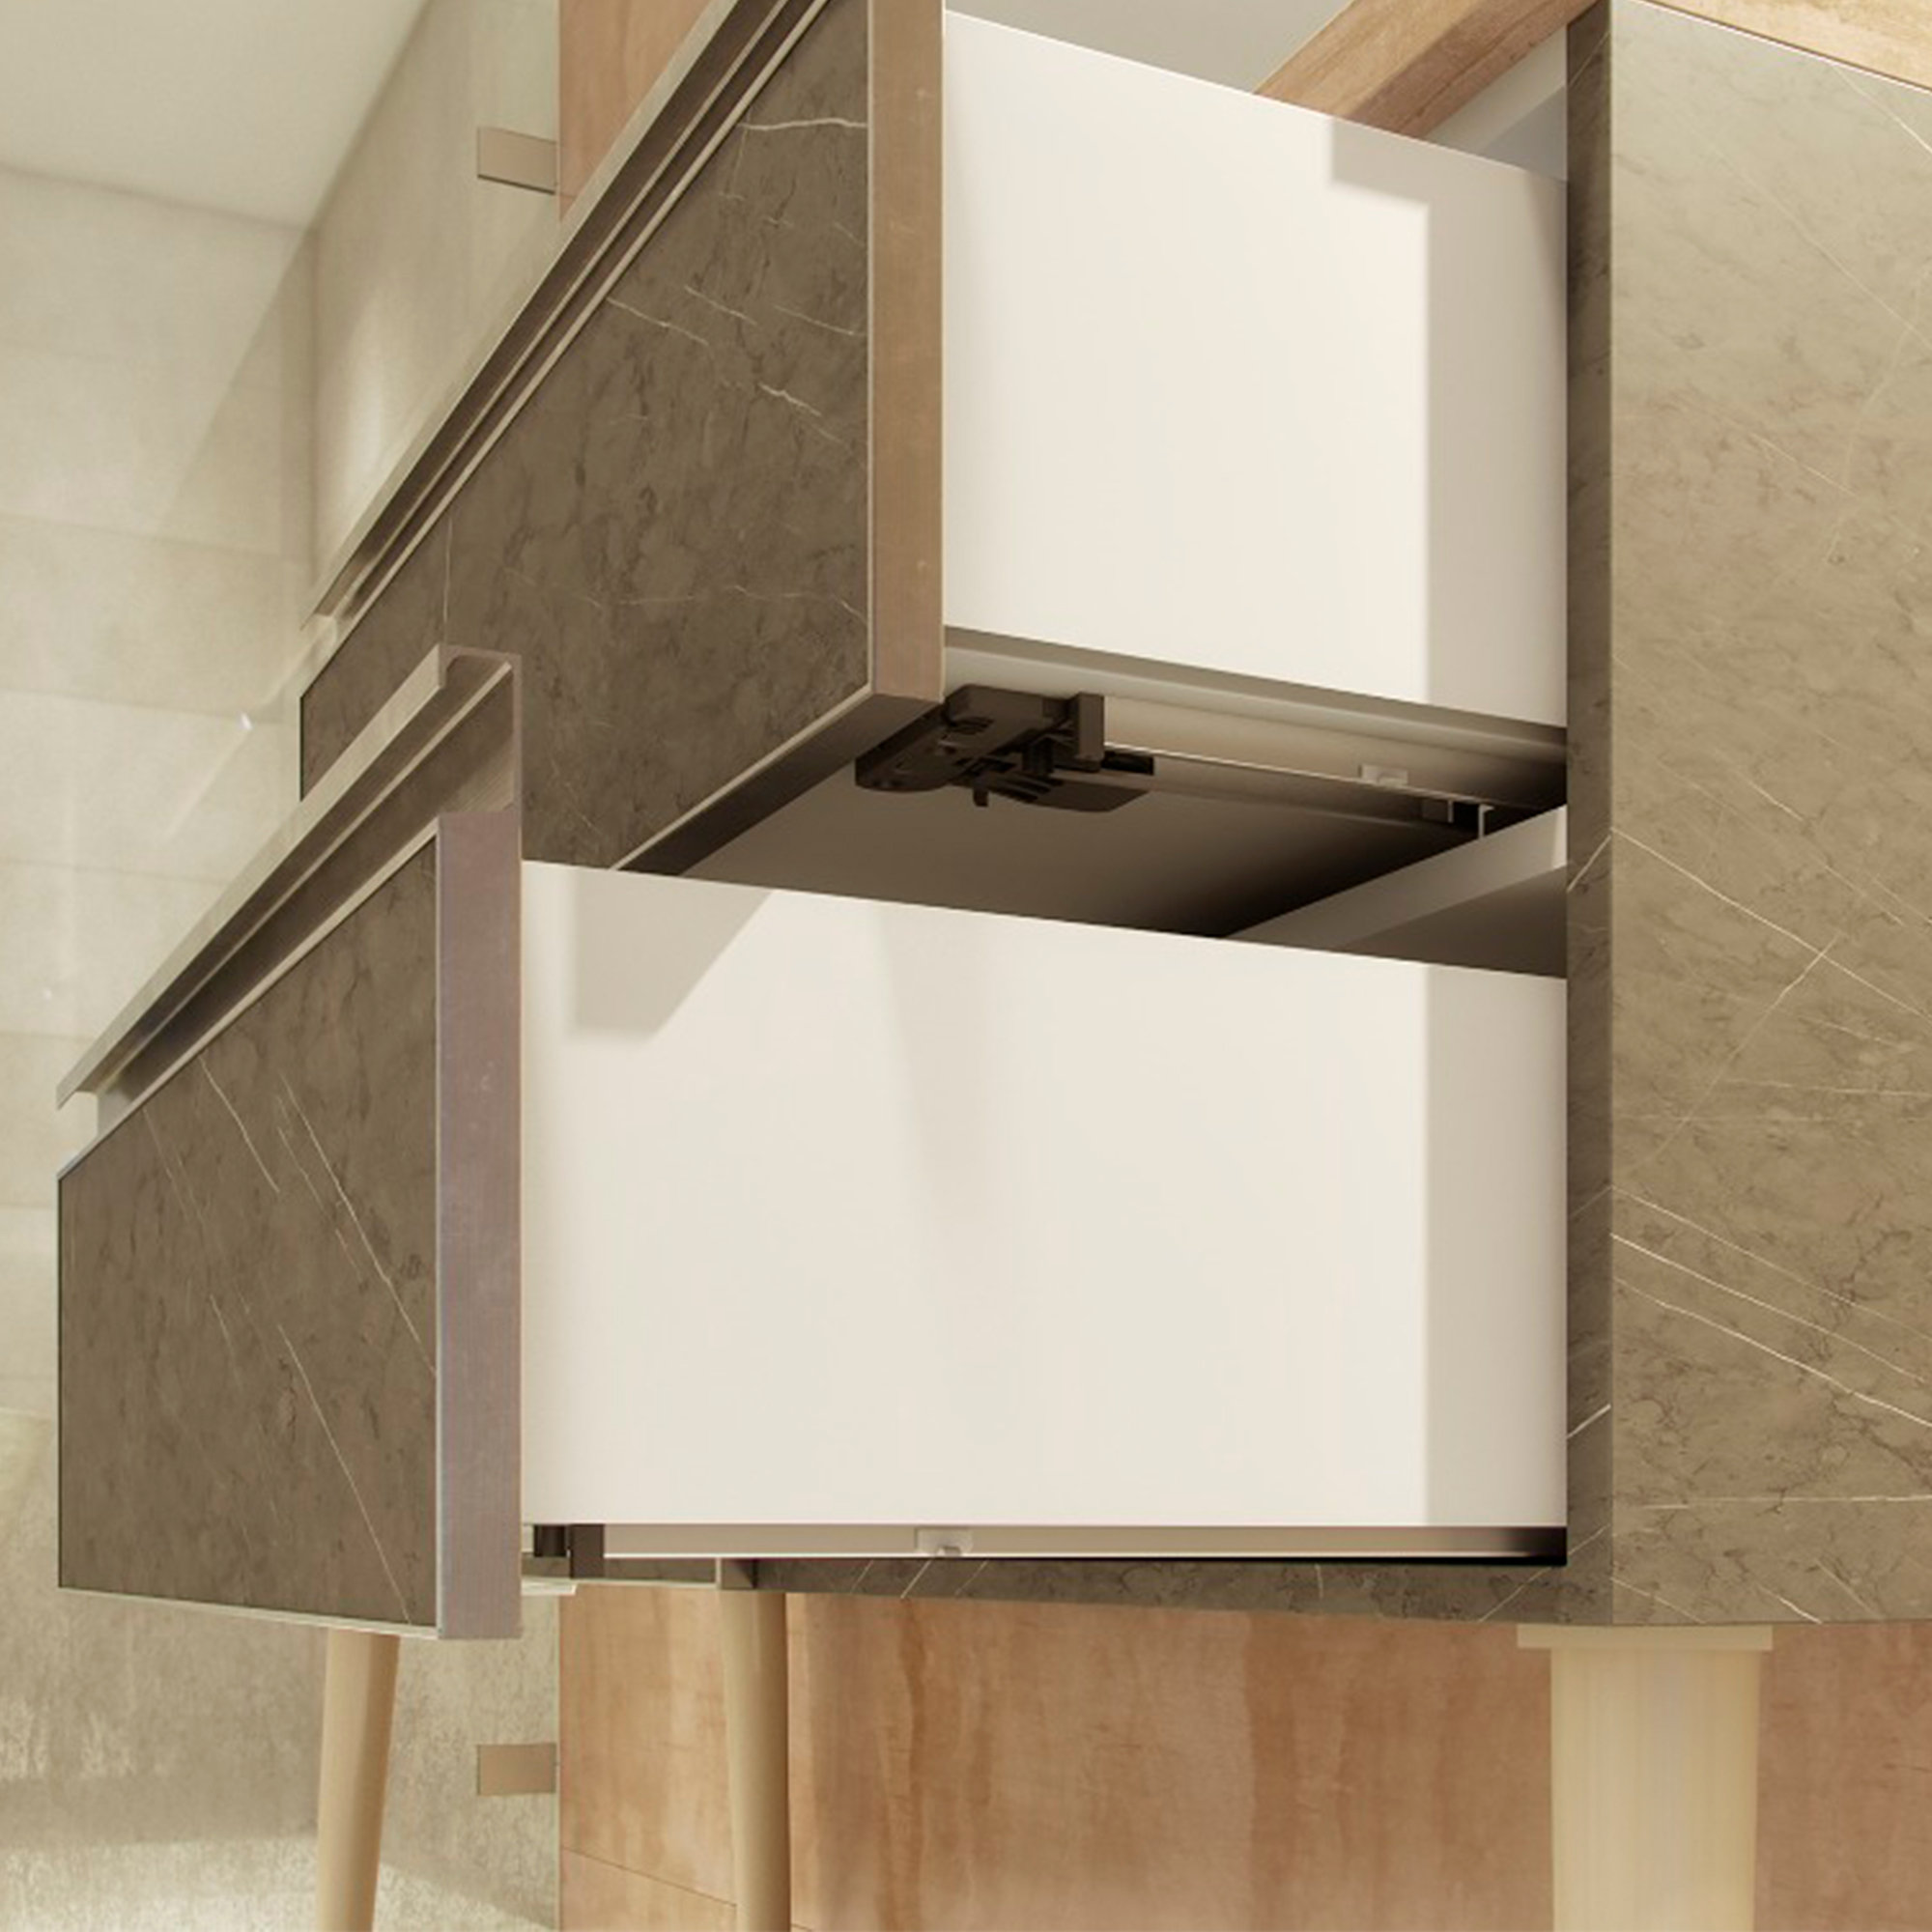 Pull out sliding shelves for kitchen cabinets from $42.95 cabinet